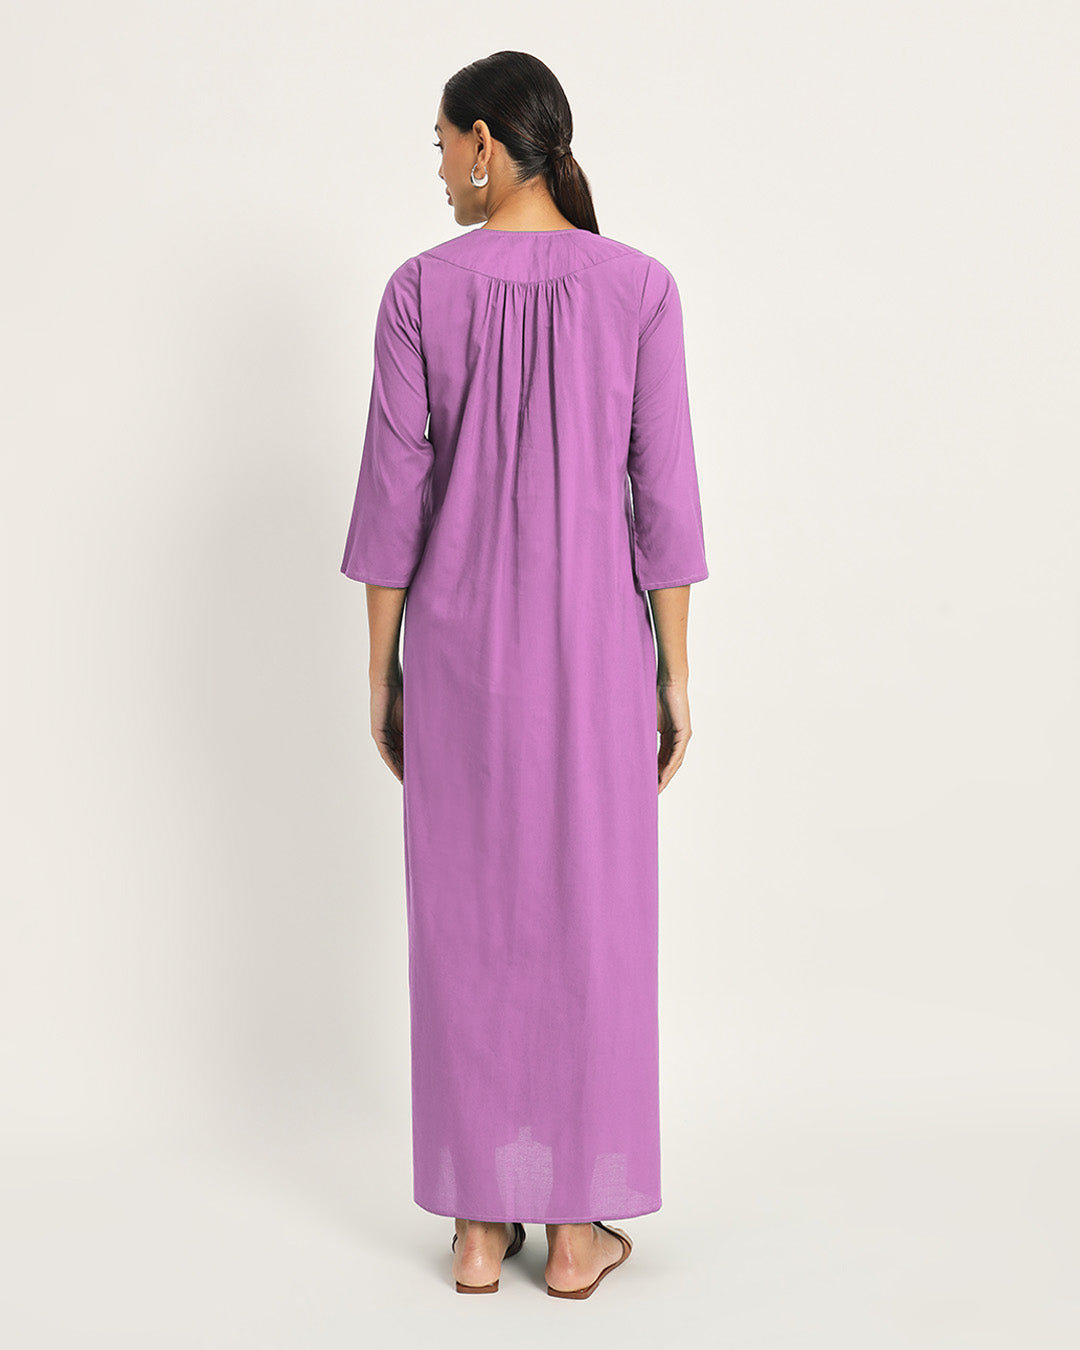 Combo: Russet Red & Wisteria Purple Nighttime Must-Have Nightdress